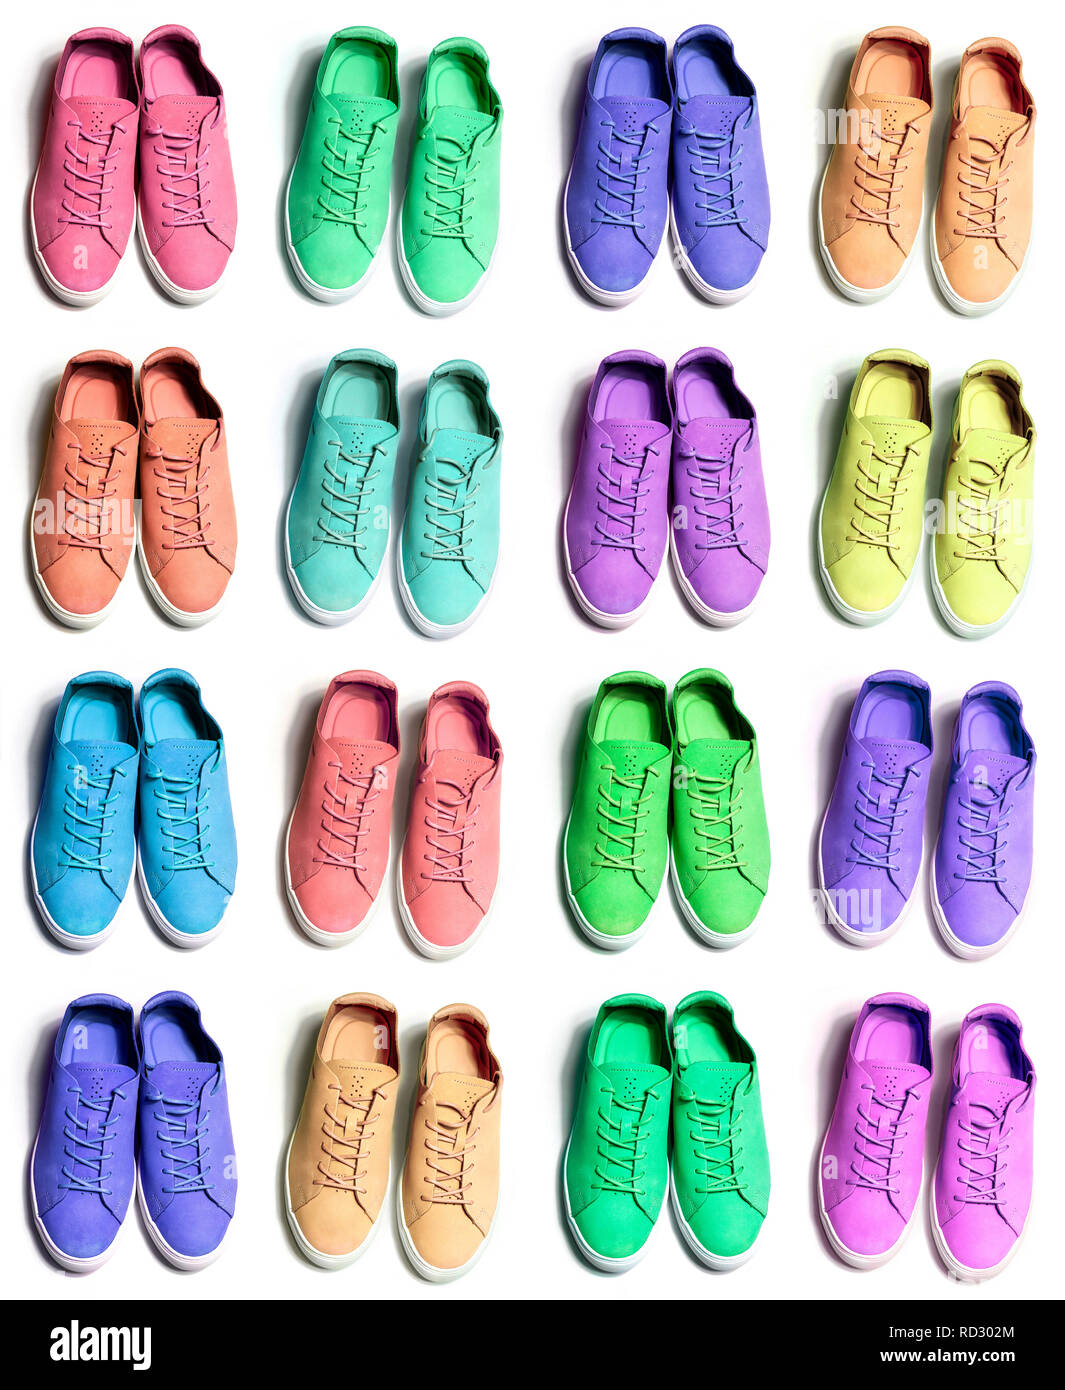 many colorful sporty sneaker shoes on white background Stock Photo